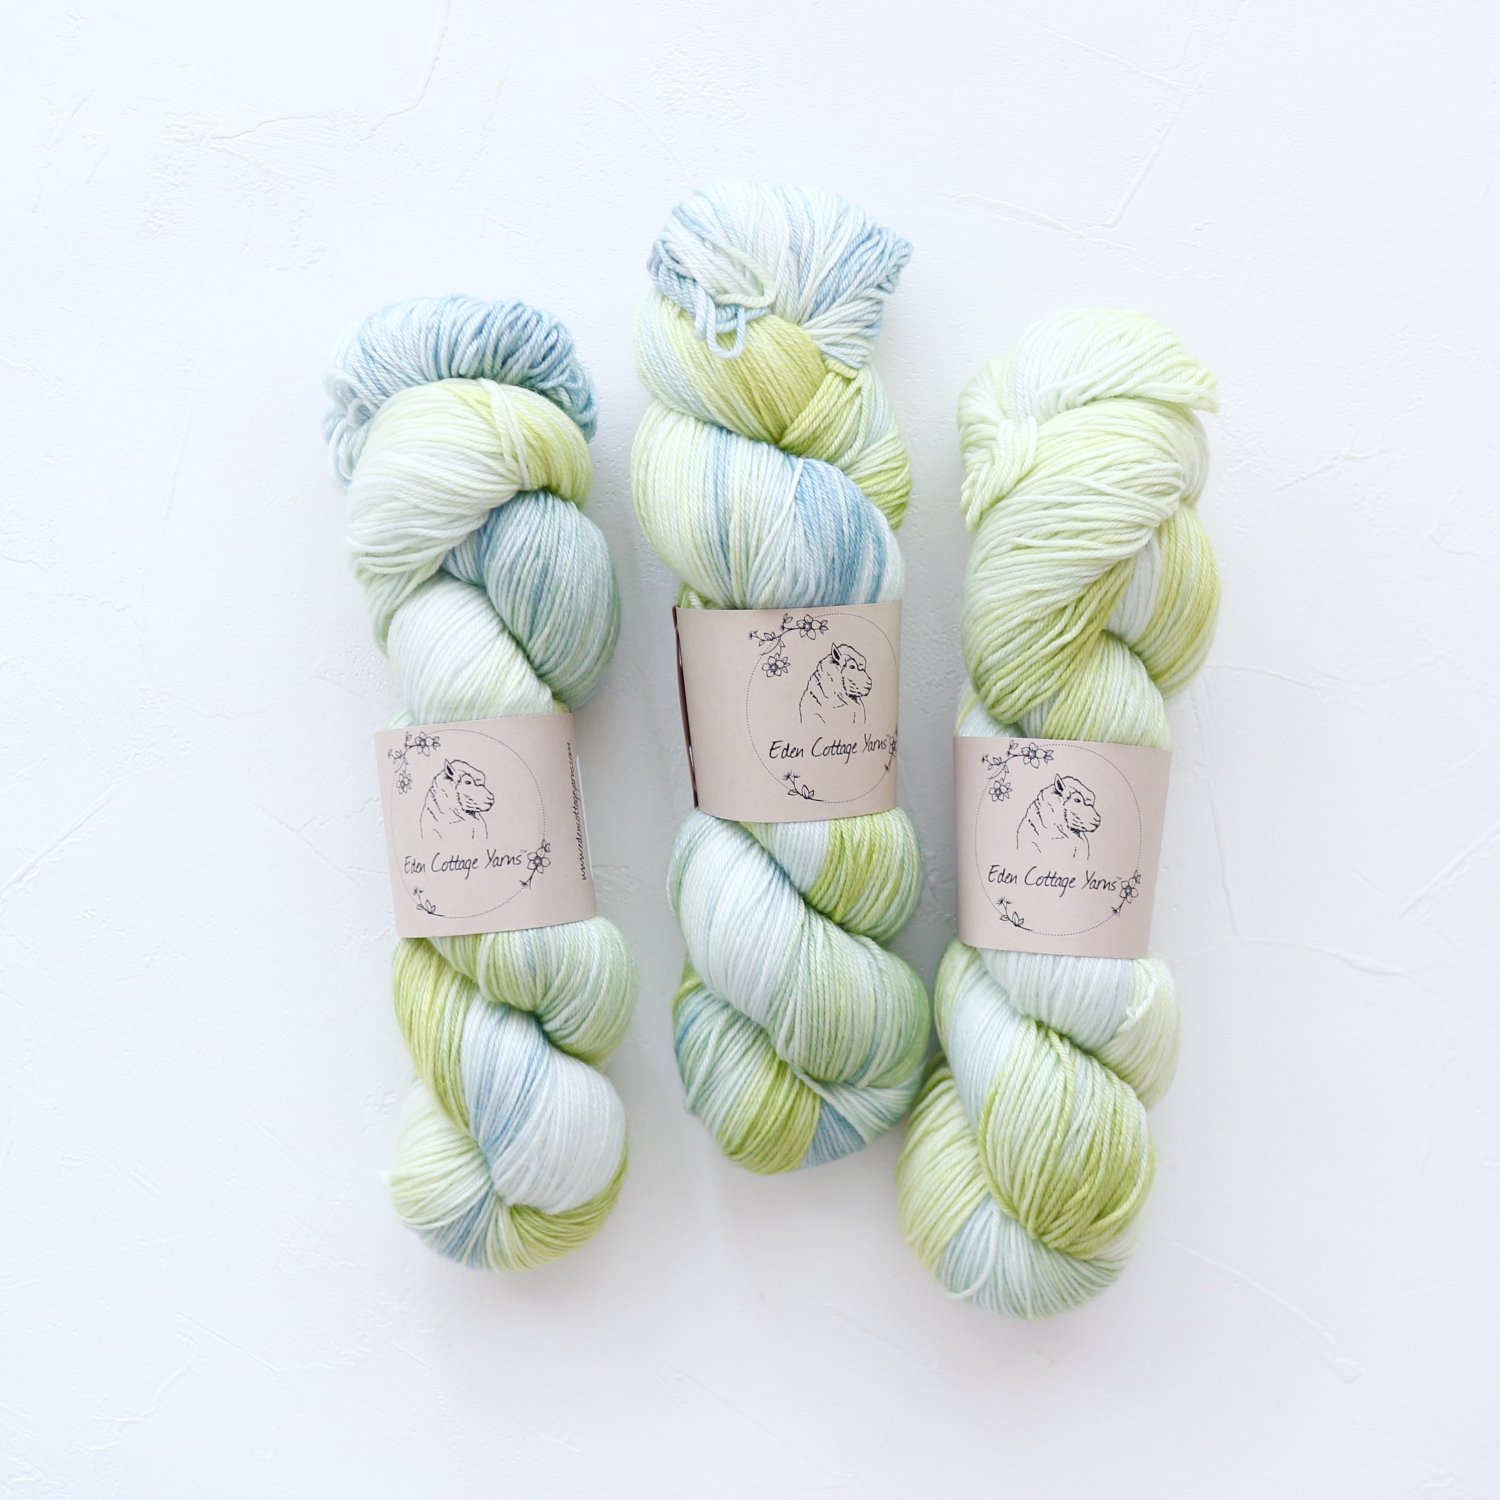 Eden Cottage Yarns<br>Pendle 4ply<br>Dragonfly